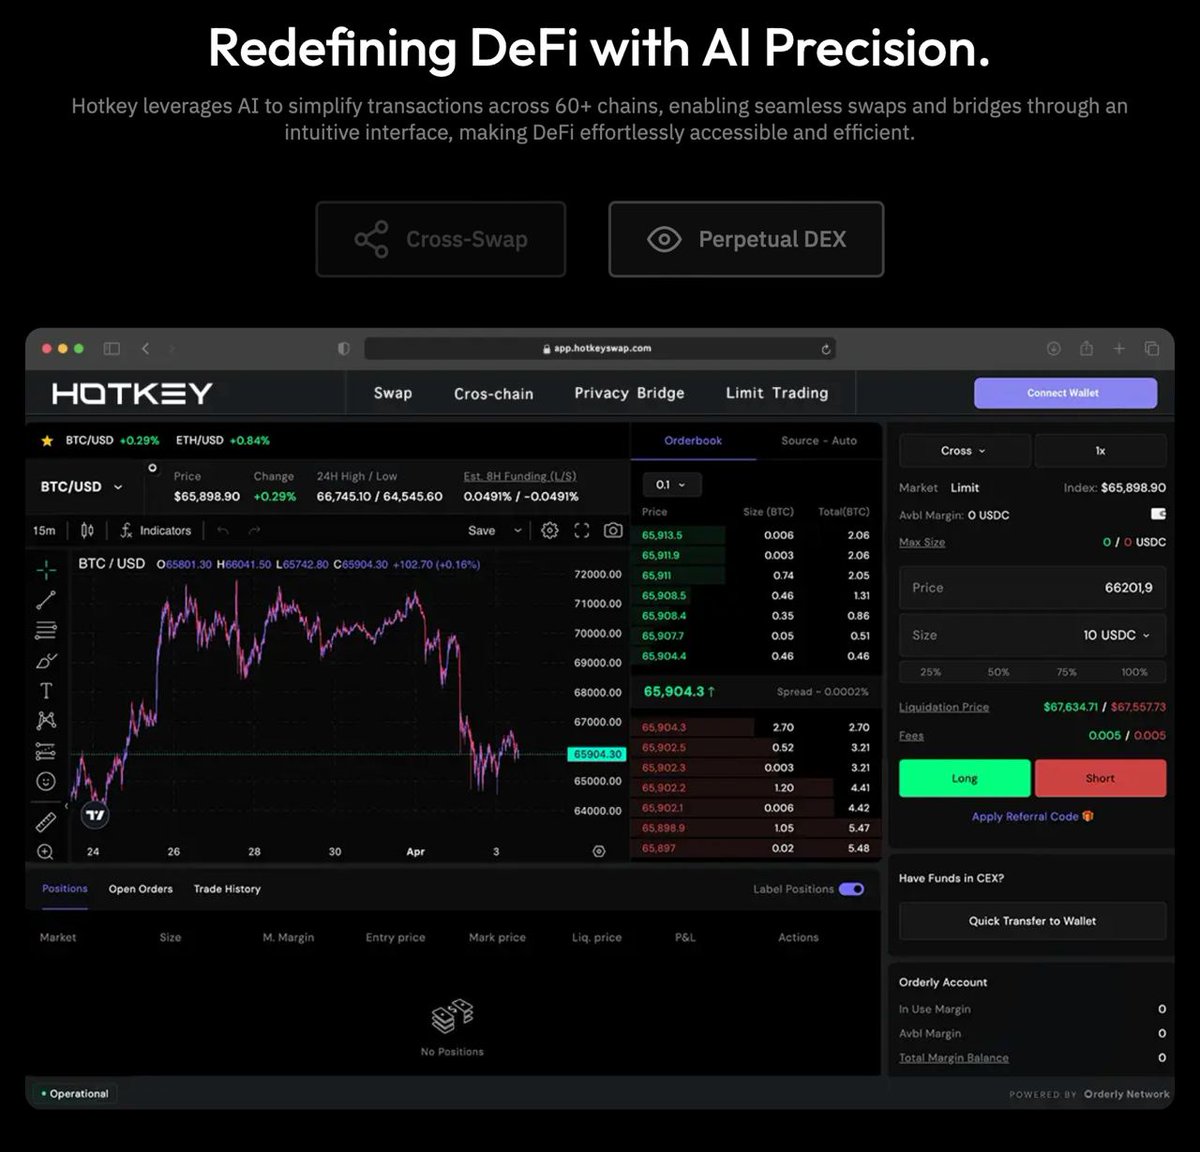 Maximize your trading efficiency with our upcoming PRO DEX, featuring advanced limit orders and access to multiple liquidity providers, including the orderly network. Optimize your strategies and capitalize on market opportunities today! Explore the benefits at…